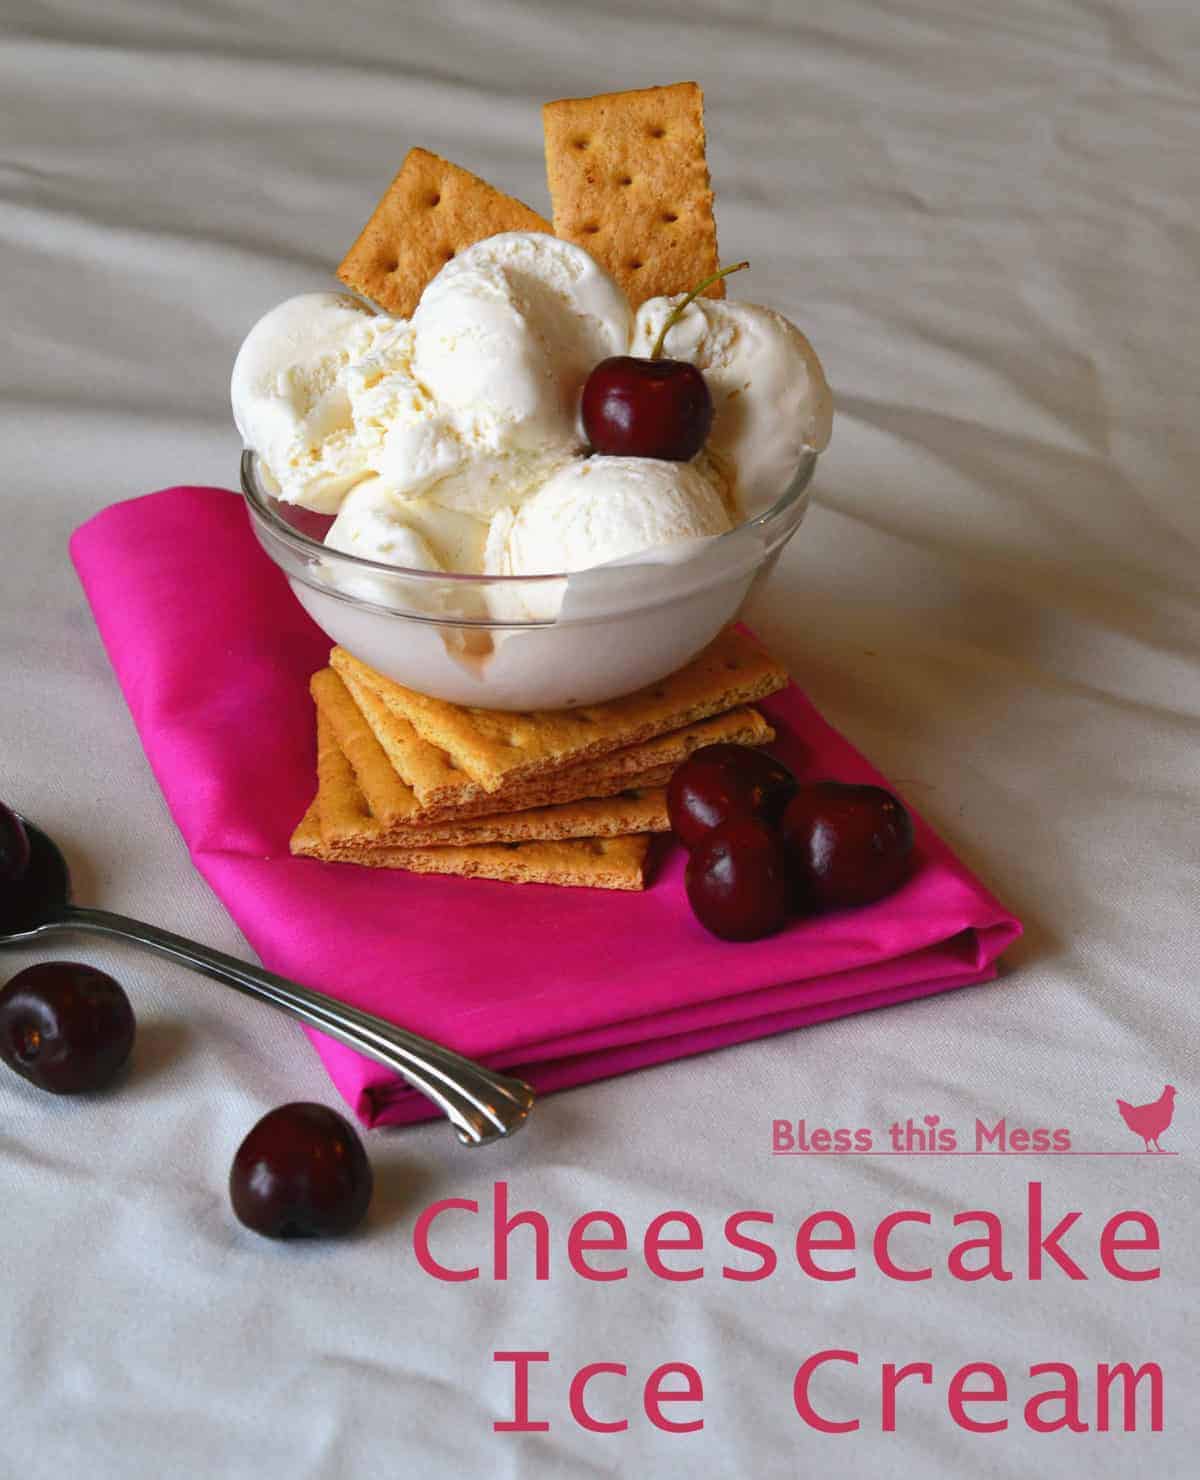 test of "cheesecake ice cream" with ghramcrackers in it